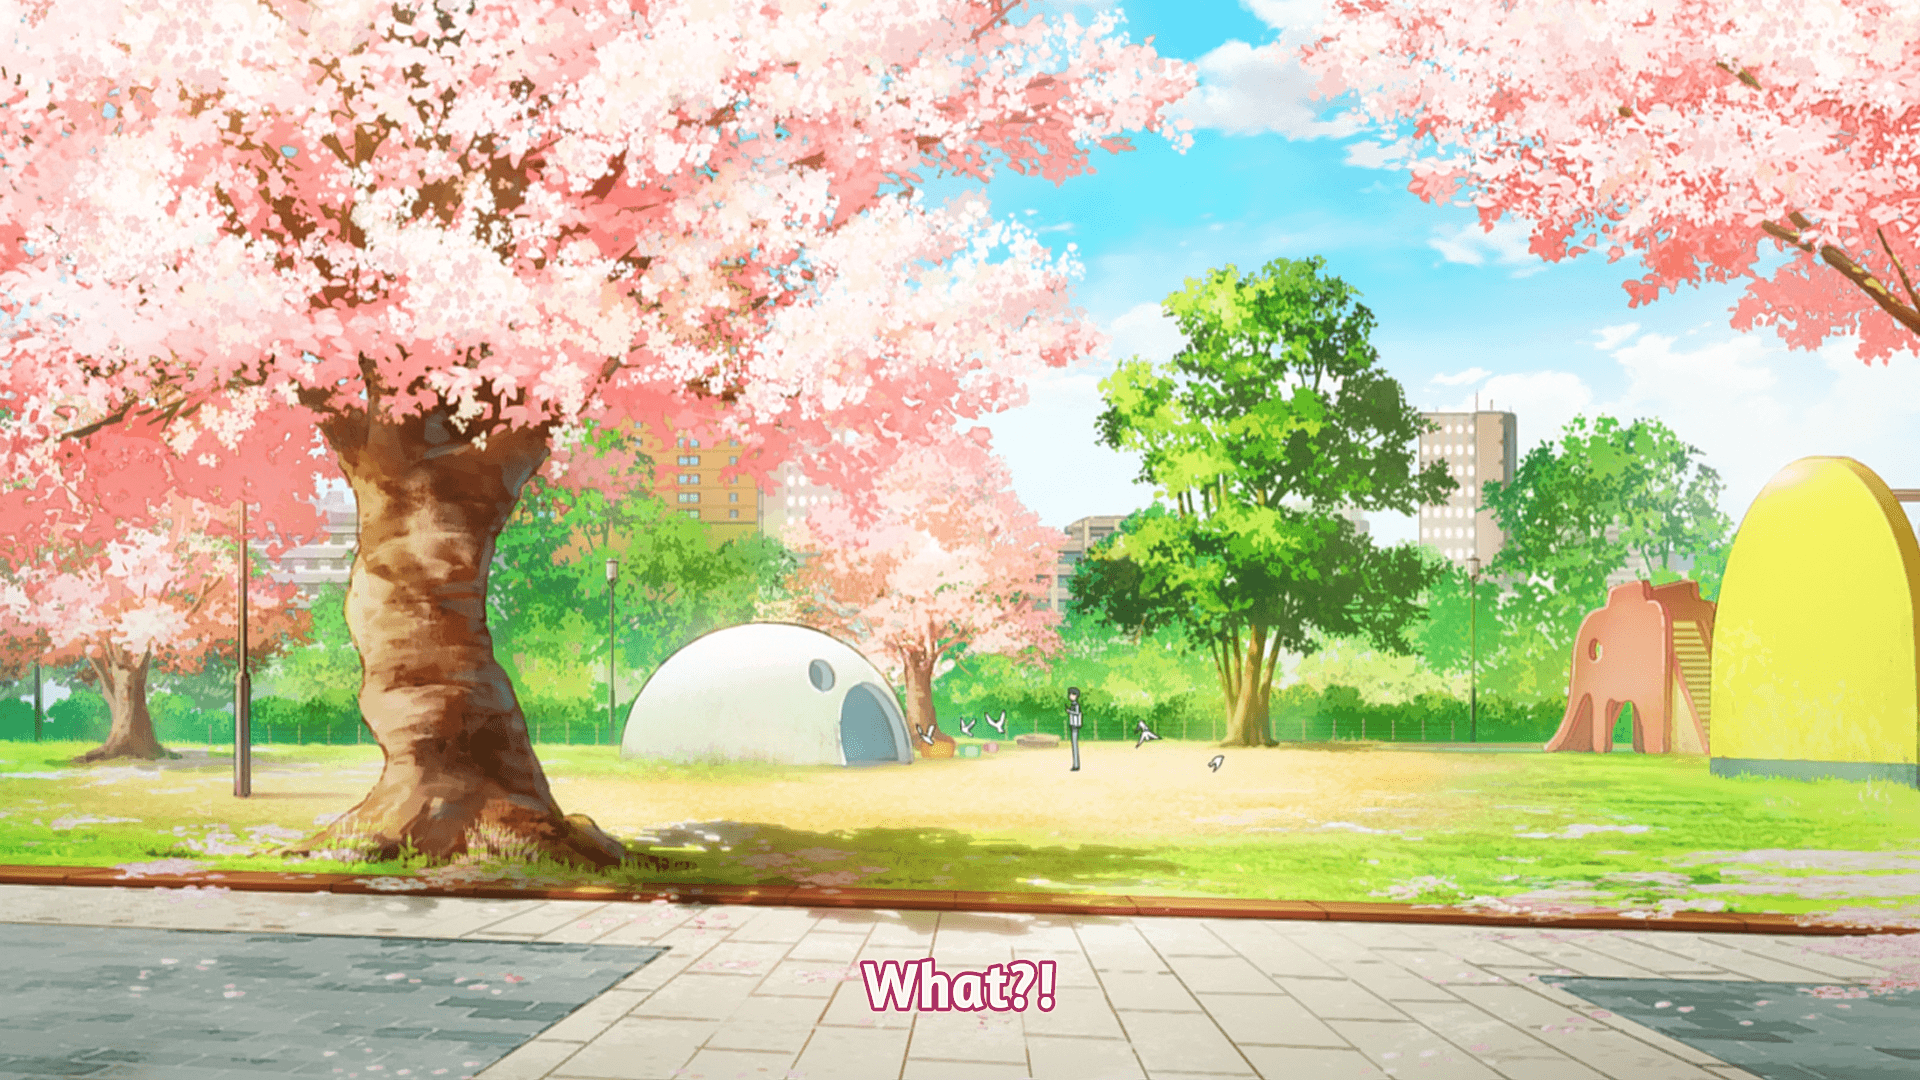 Your Lie in April Cherry Blossoms Wallpapers - Top Free Your Lie in